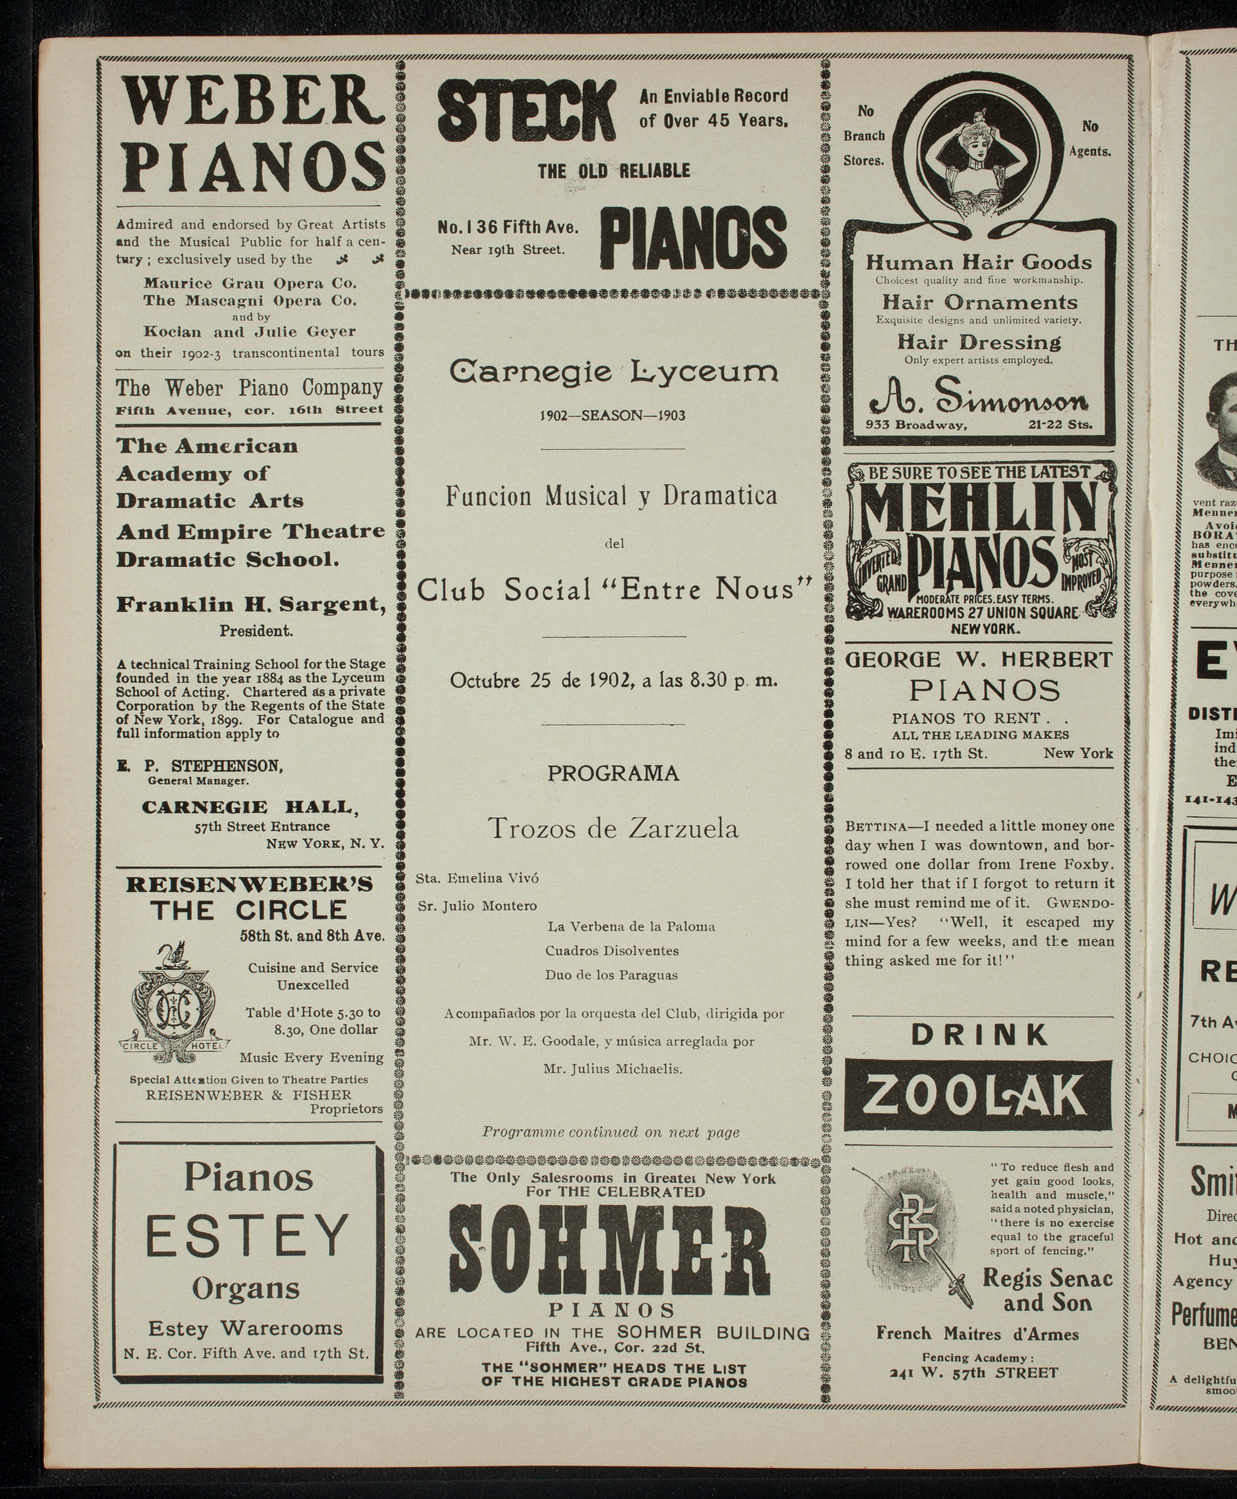 Club Social "Entre Nous" Musical and Dramatic Program, October 25, 1902, program page 2